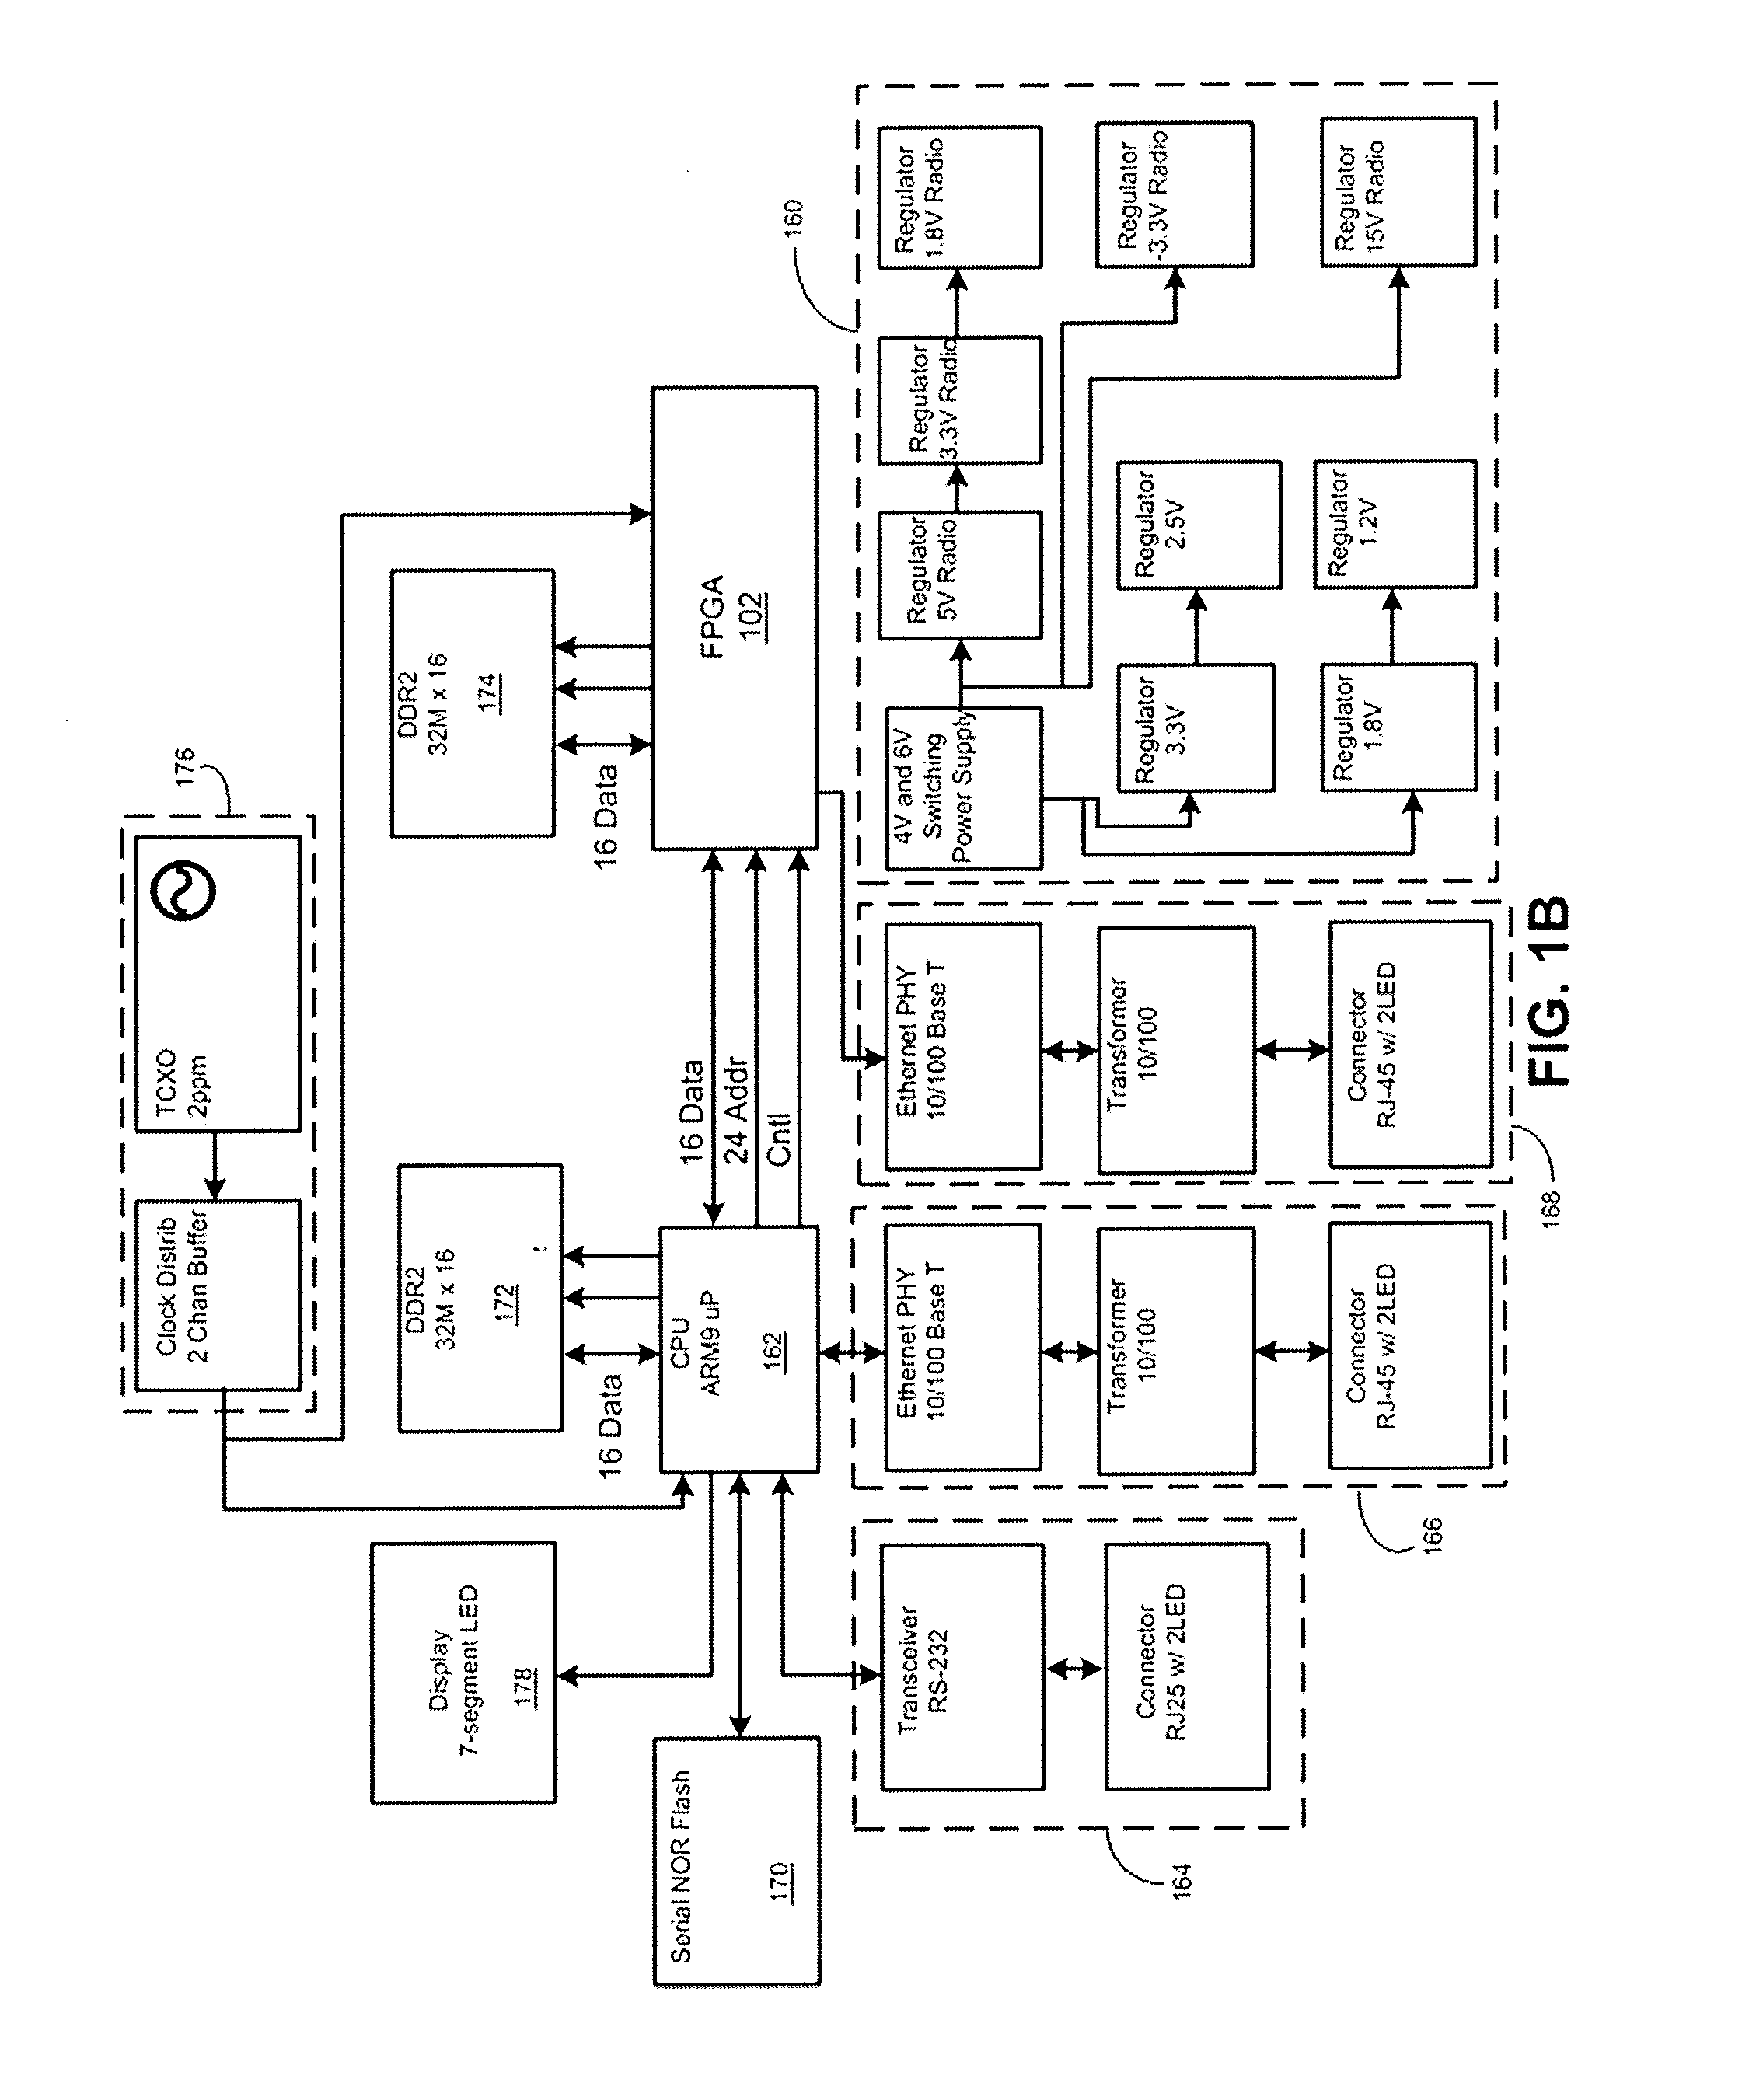 Dual receiver/transmitter radio devices with choke